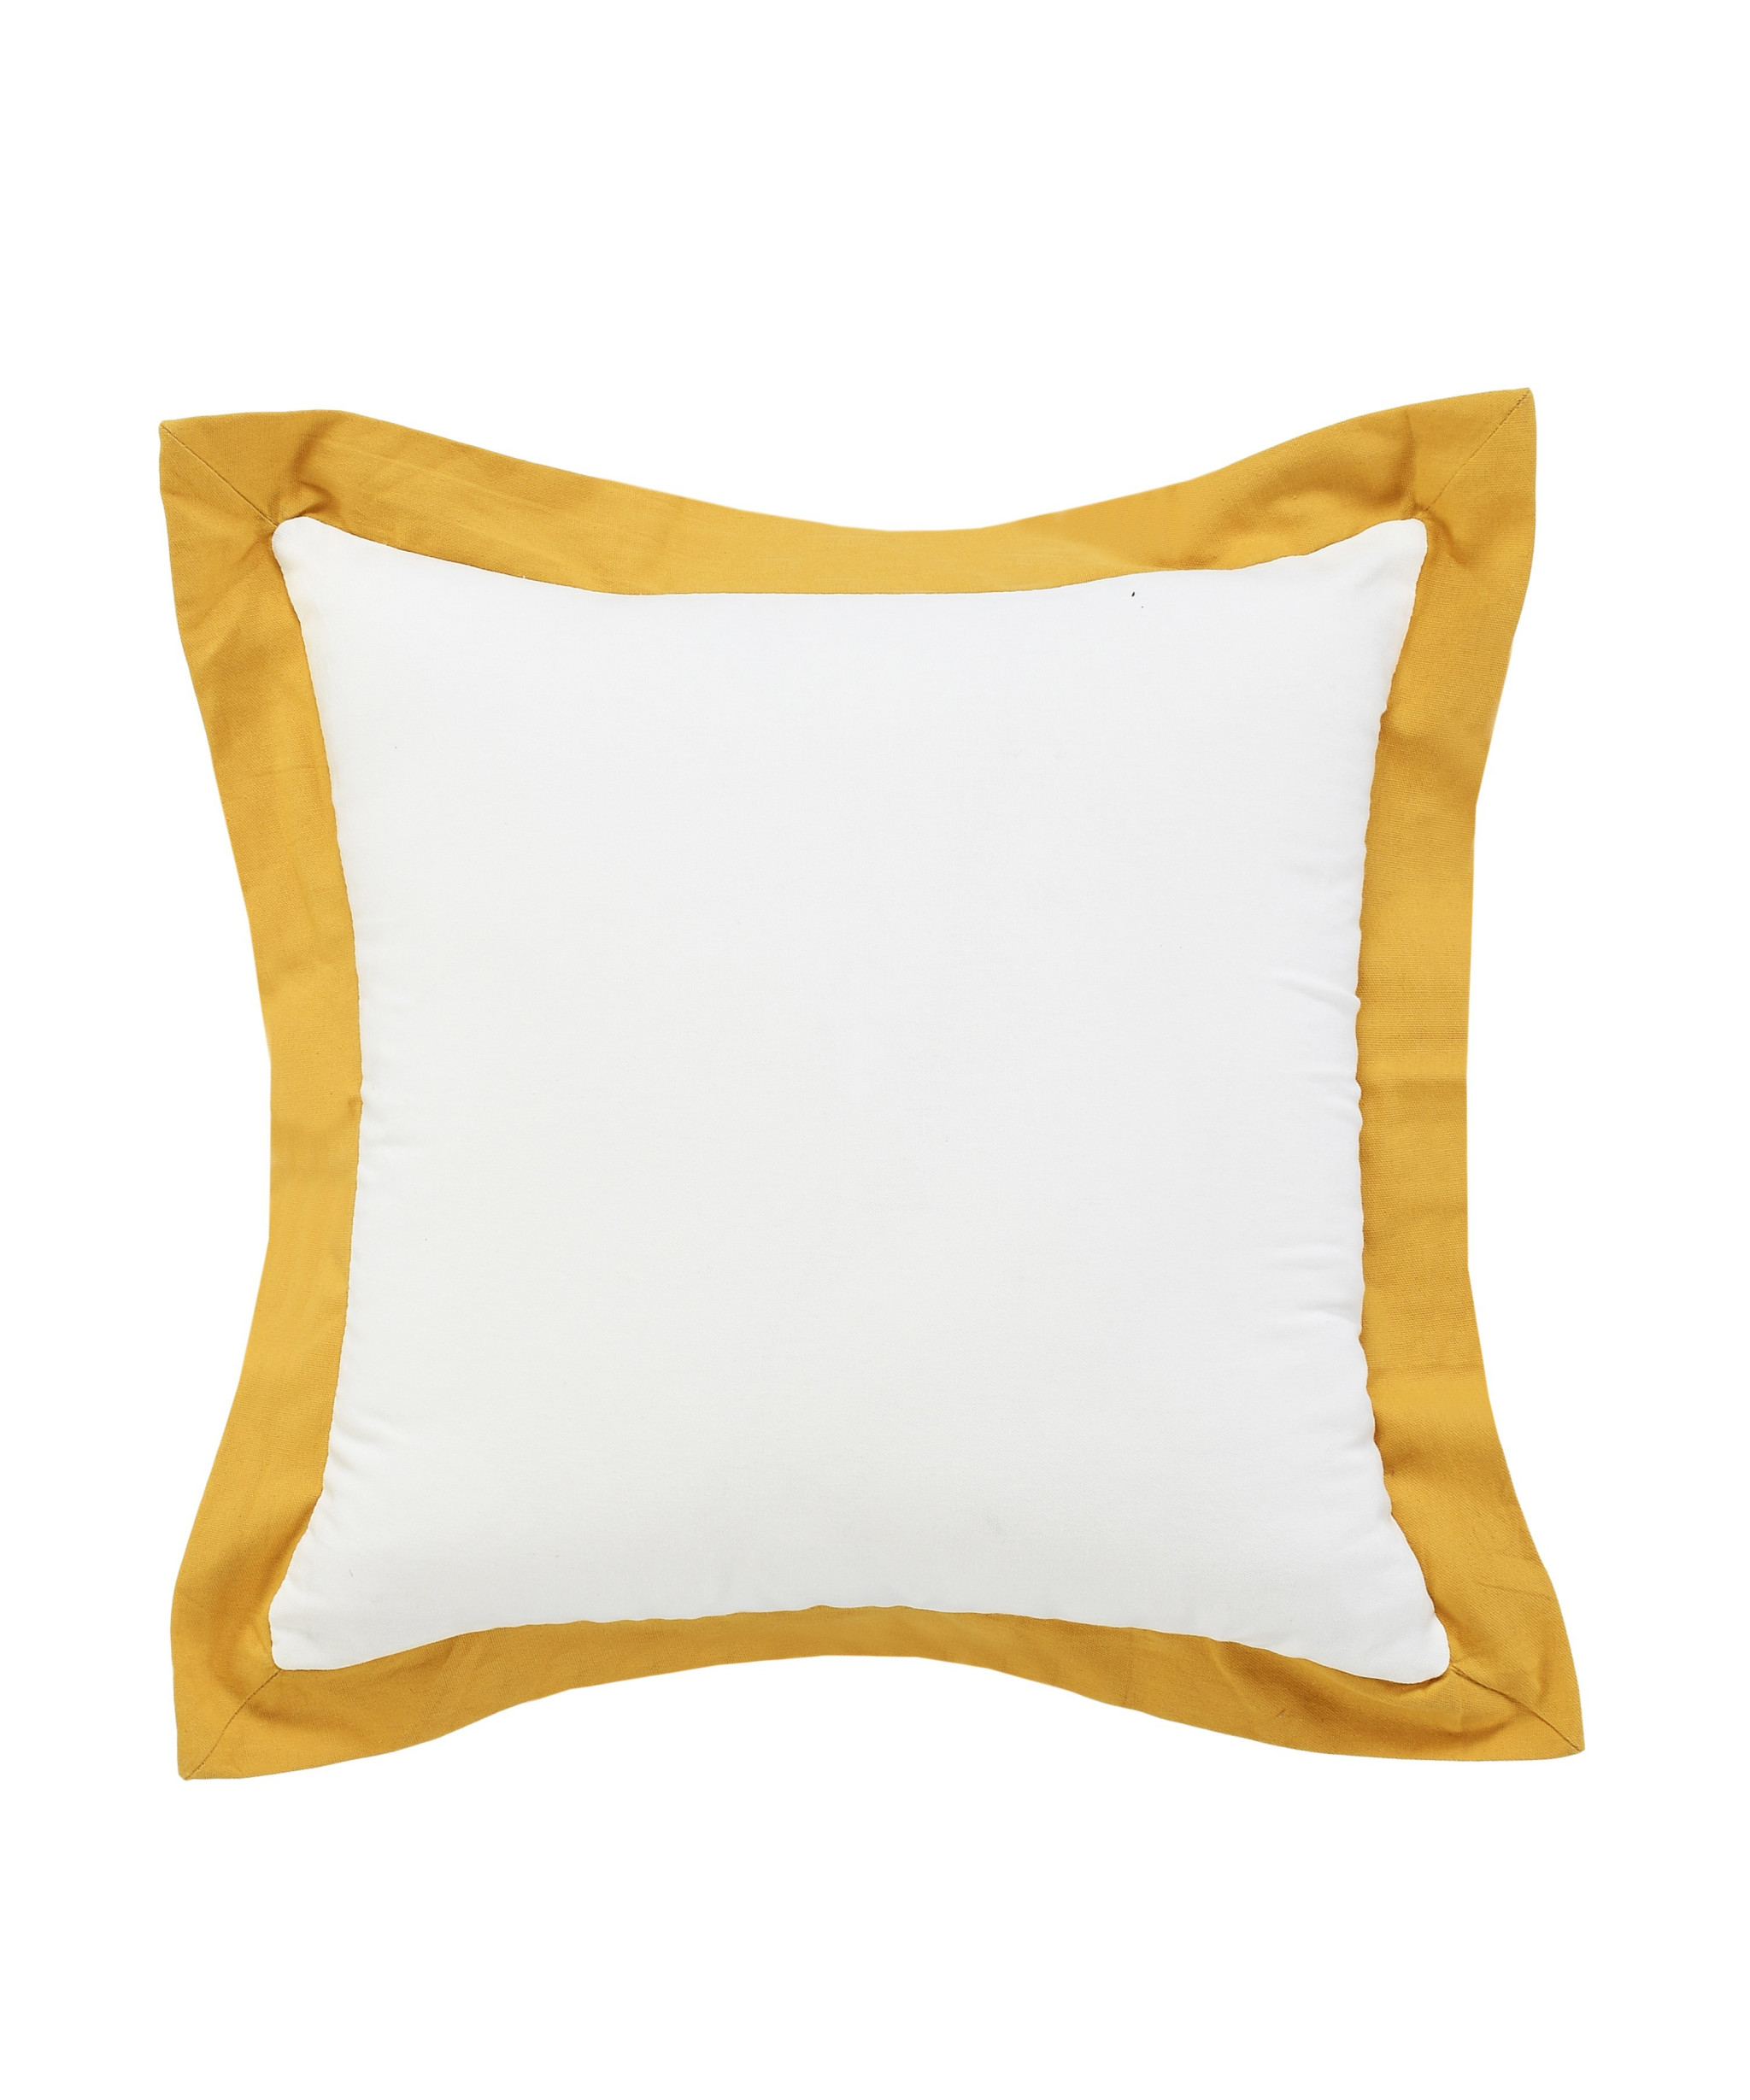 20" X 20" White And Golden Yellow 100% Cotton Geometric Zippered Pillow-516826-1